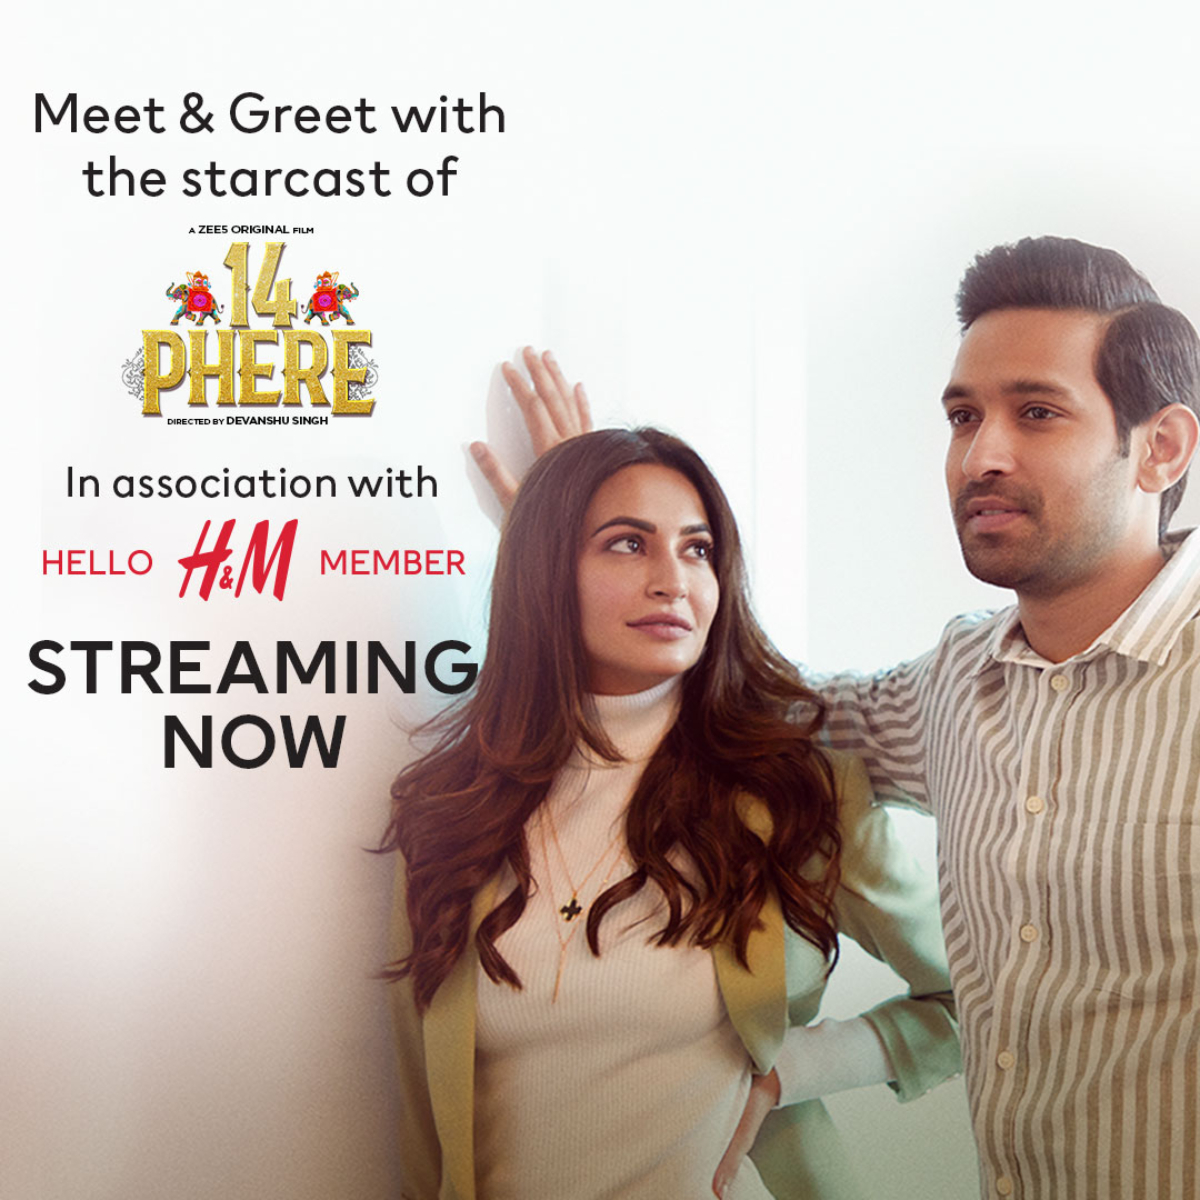 THIS entertaining meet between H&M’s loyalty winners and the cast of ‘14 Phere’ had us hooked!